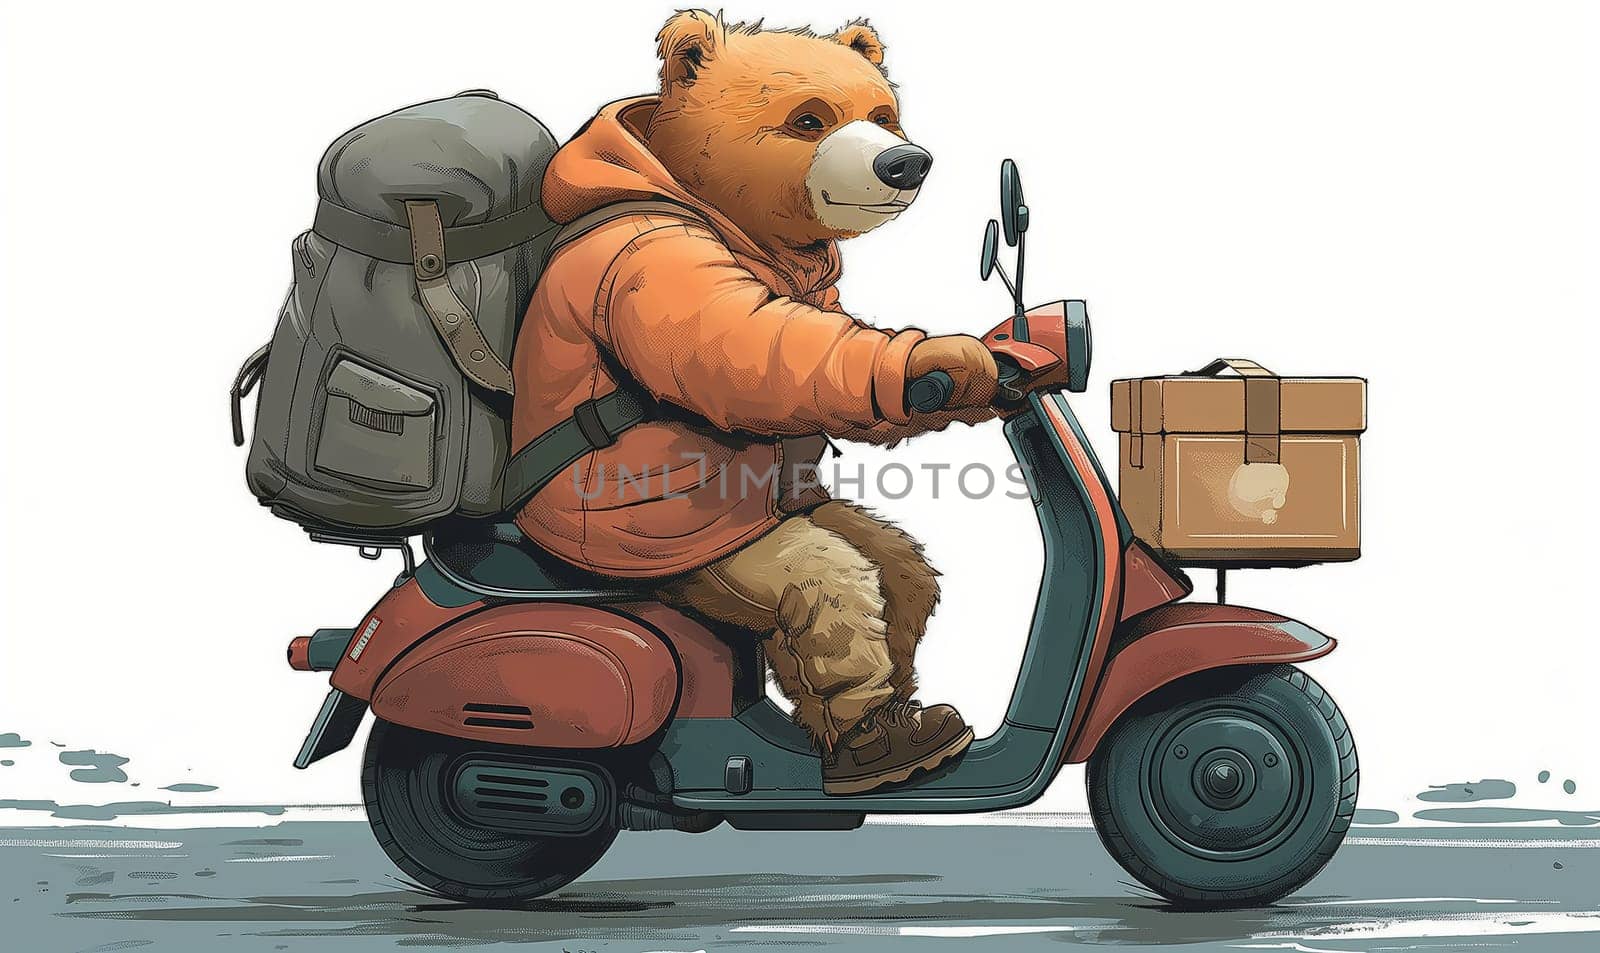 Children's illustration, a bear on a motorcycle with a backpack. by Fischeron